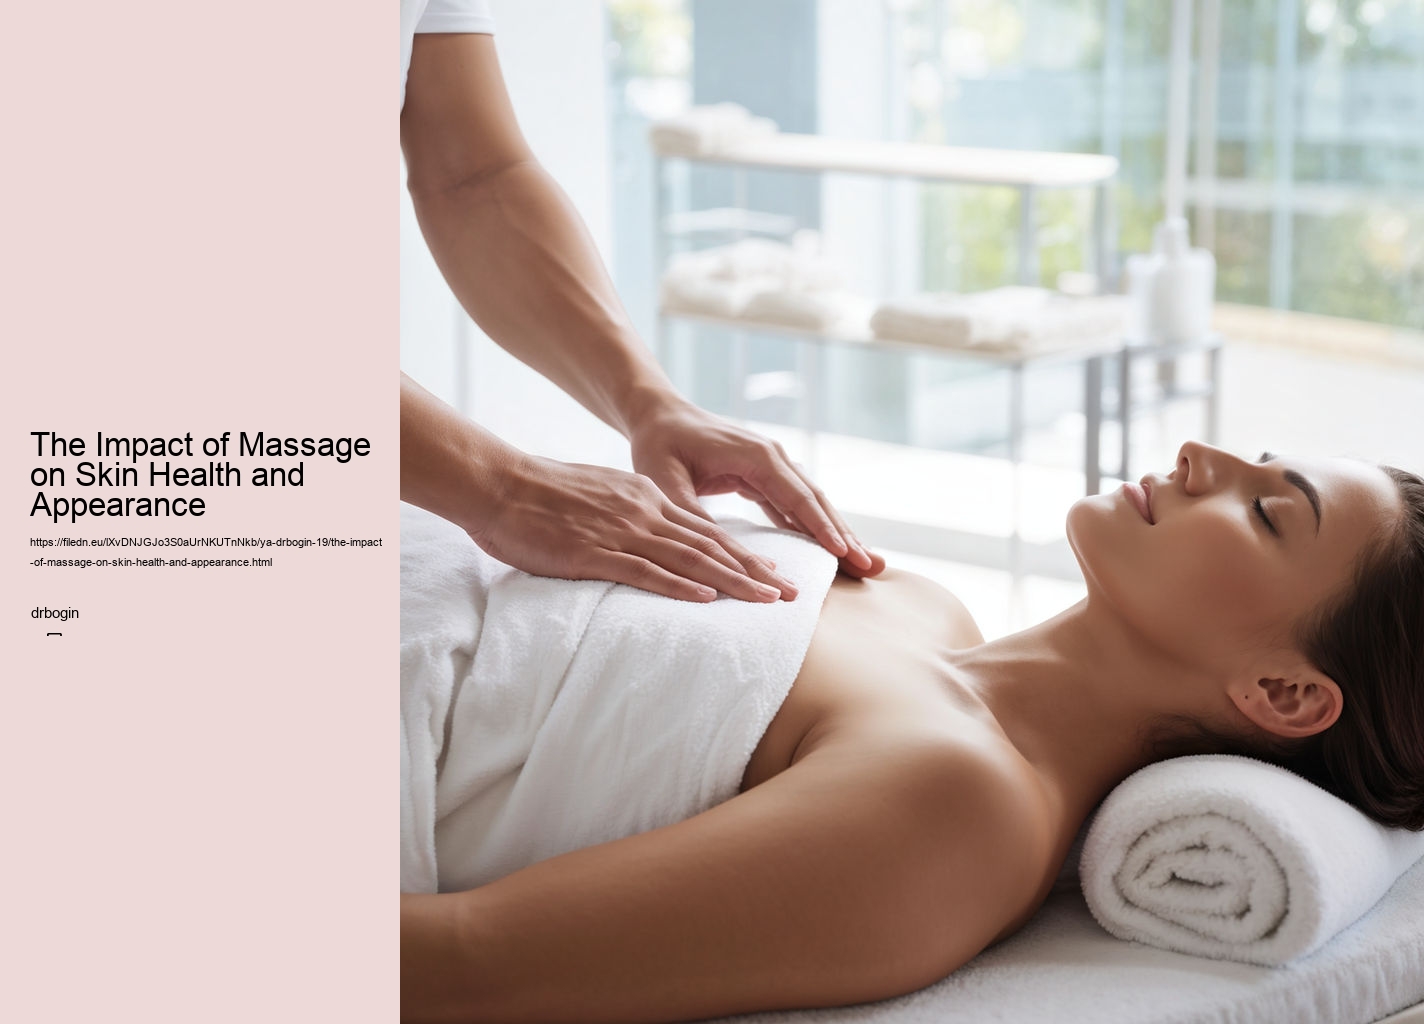 The Impact of Massage on Skin Health and Appearance